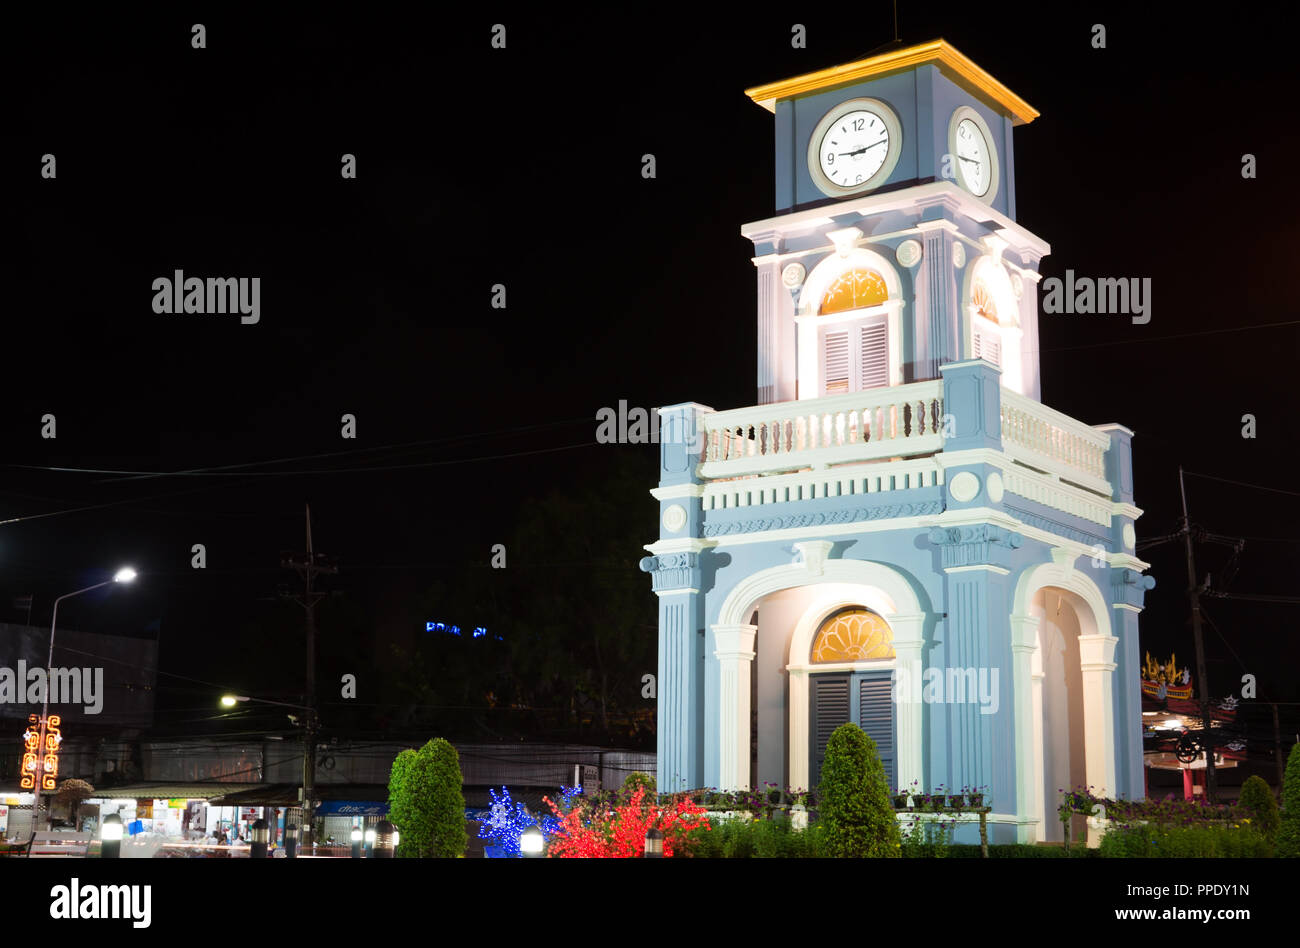 Surin Circle was located in the center of the Phuket town, it's a roundabout of the main road of Phuket town, with a historical clock tower at center  Stock Photo